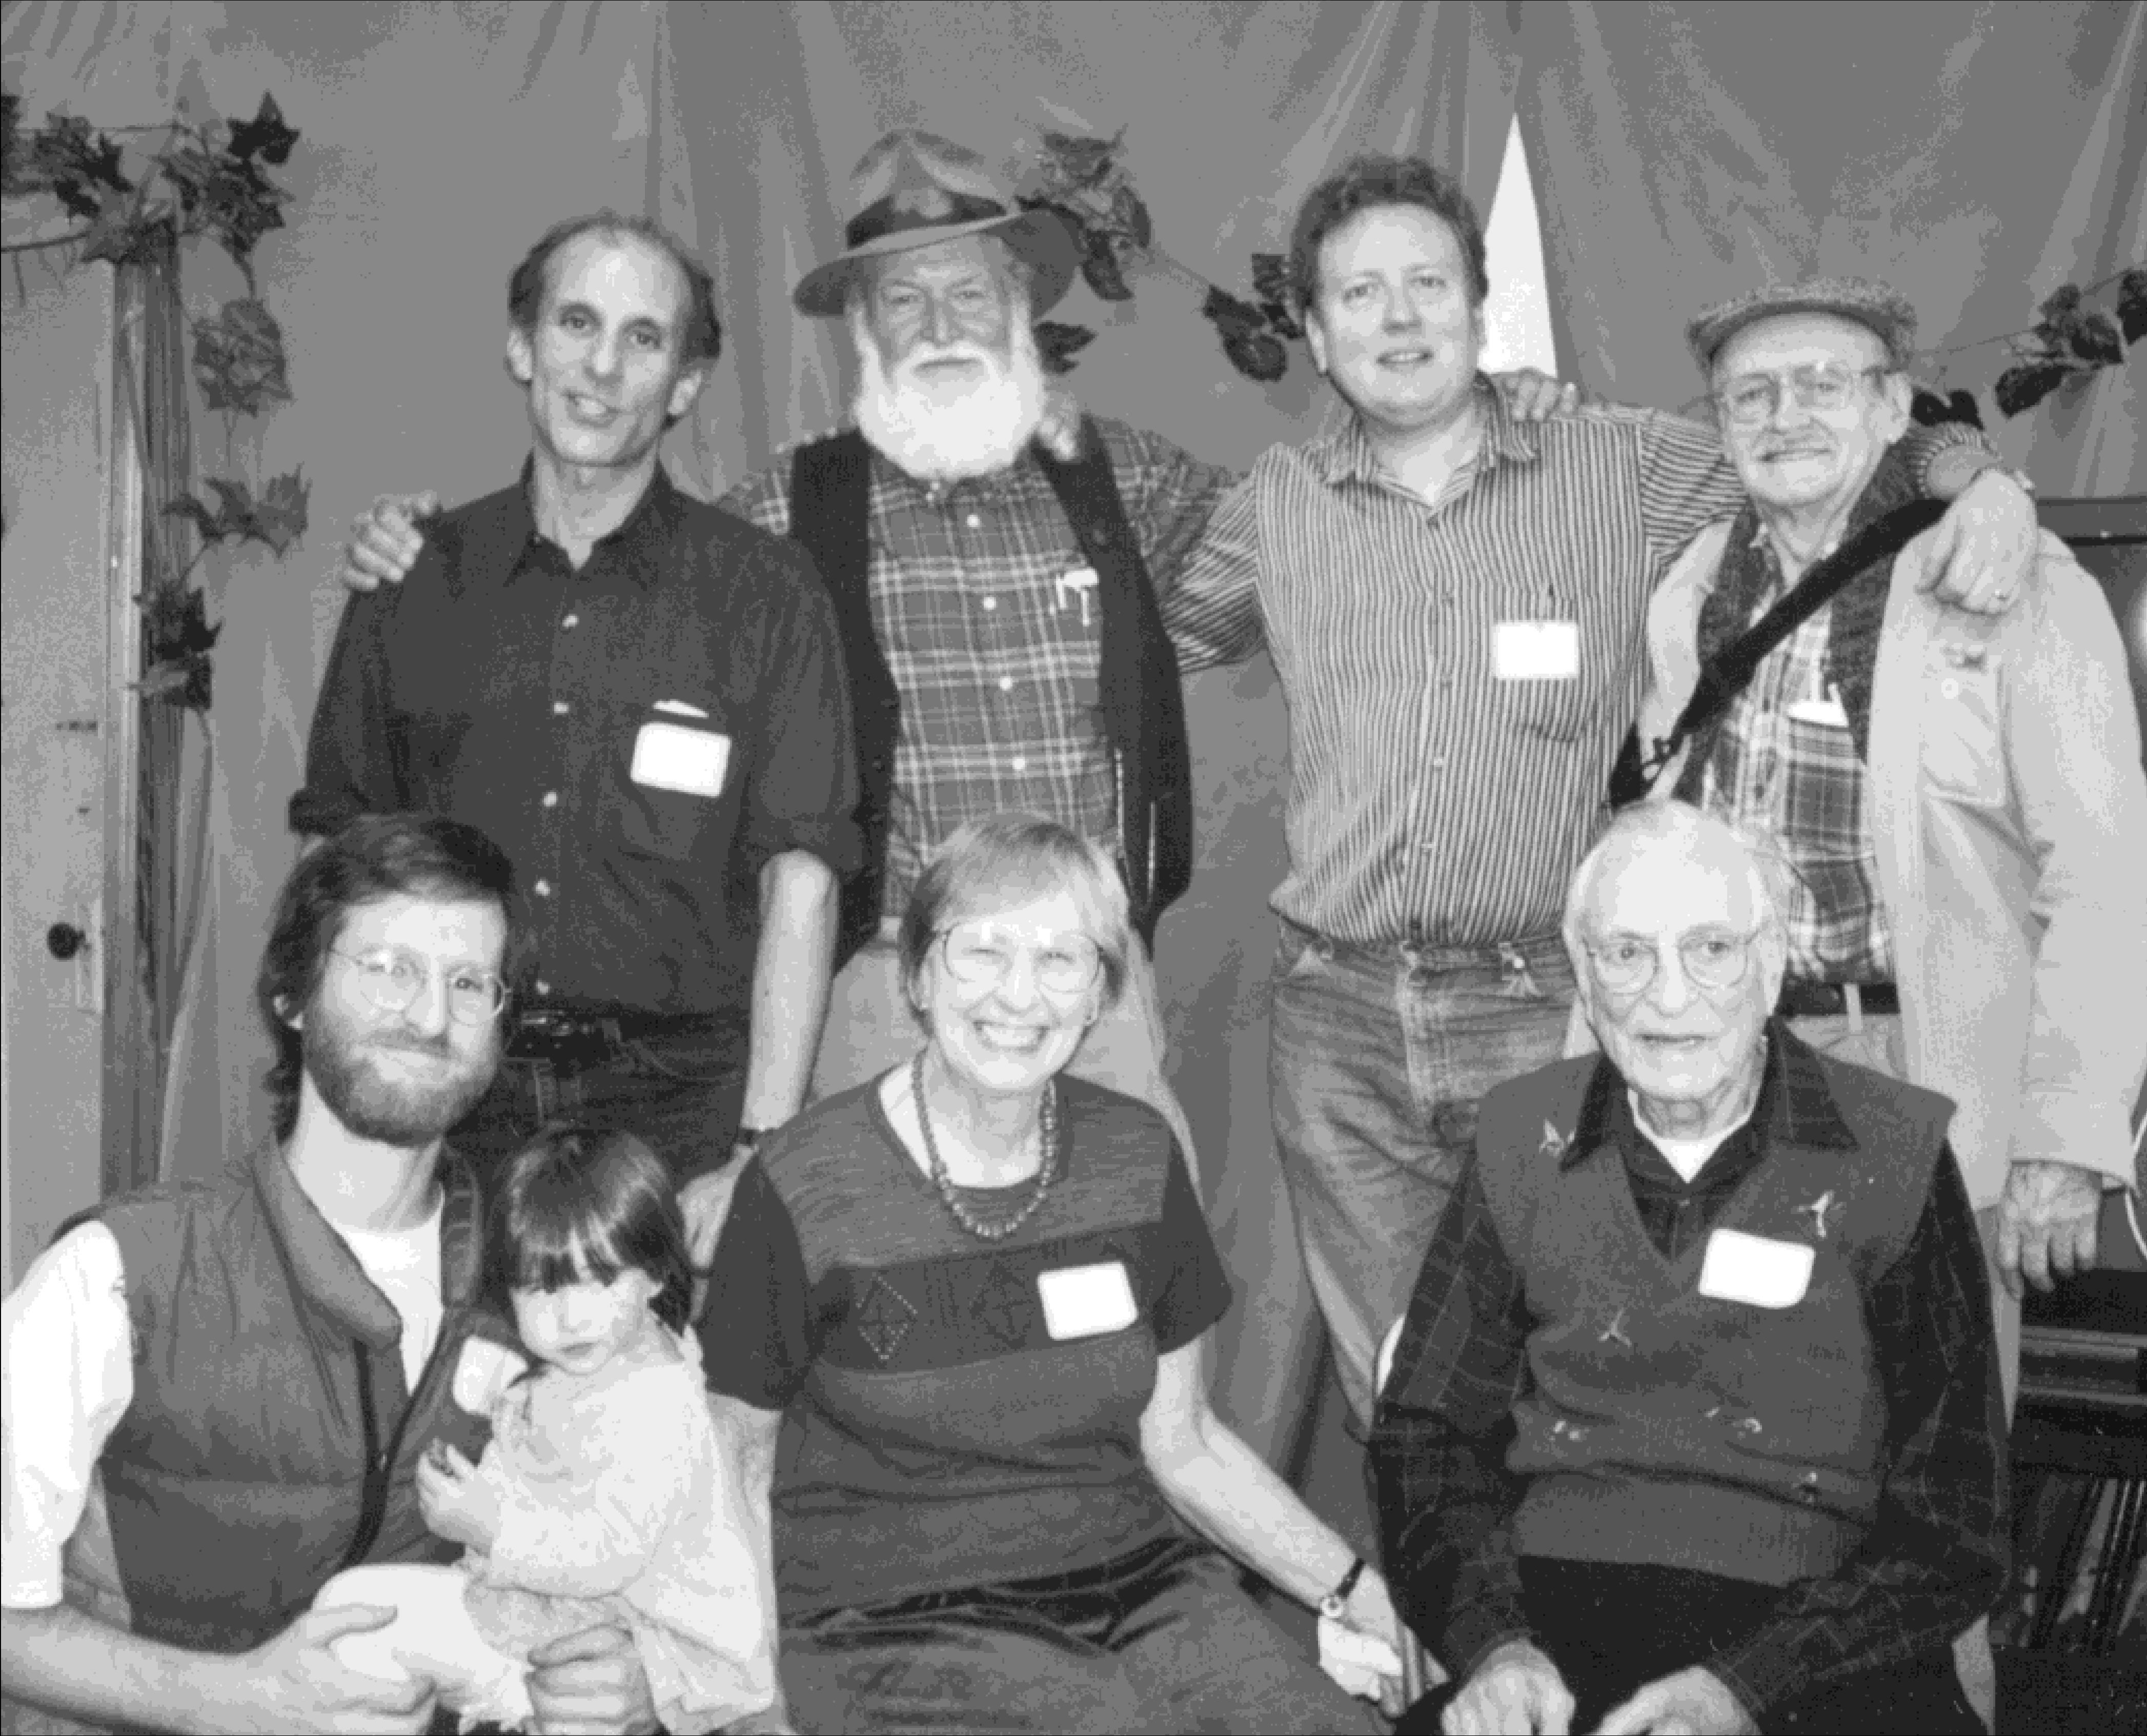 Chicago Friends of the Lincoln Brigade and Ed Balchowsky Committee, in 2000. Standing (l-r): Peter Glazer, Utah Phillips, Brian Peterlinz, Stuart McCarrell; seated: Jeff Balch, Maple Balch, Bobby Hall, and Chuck Hall.